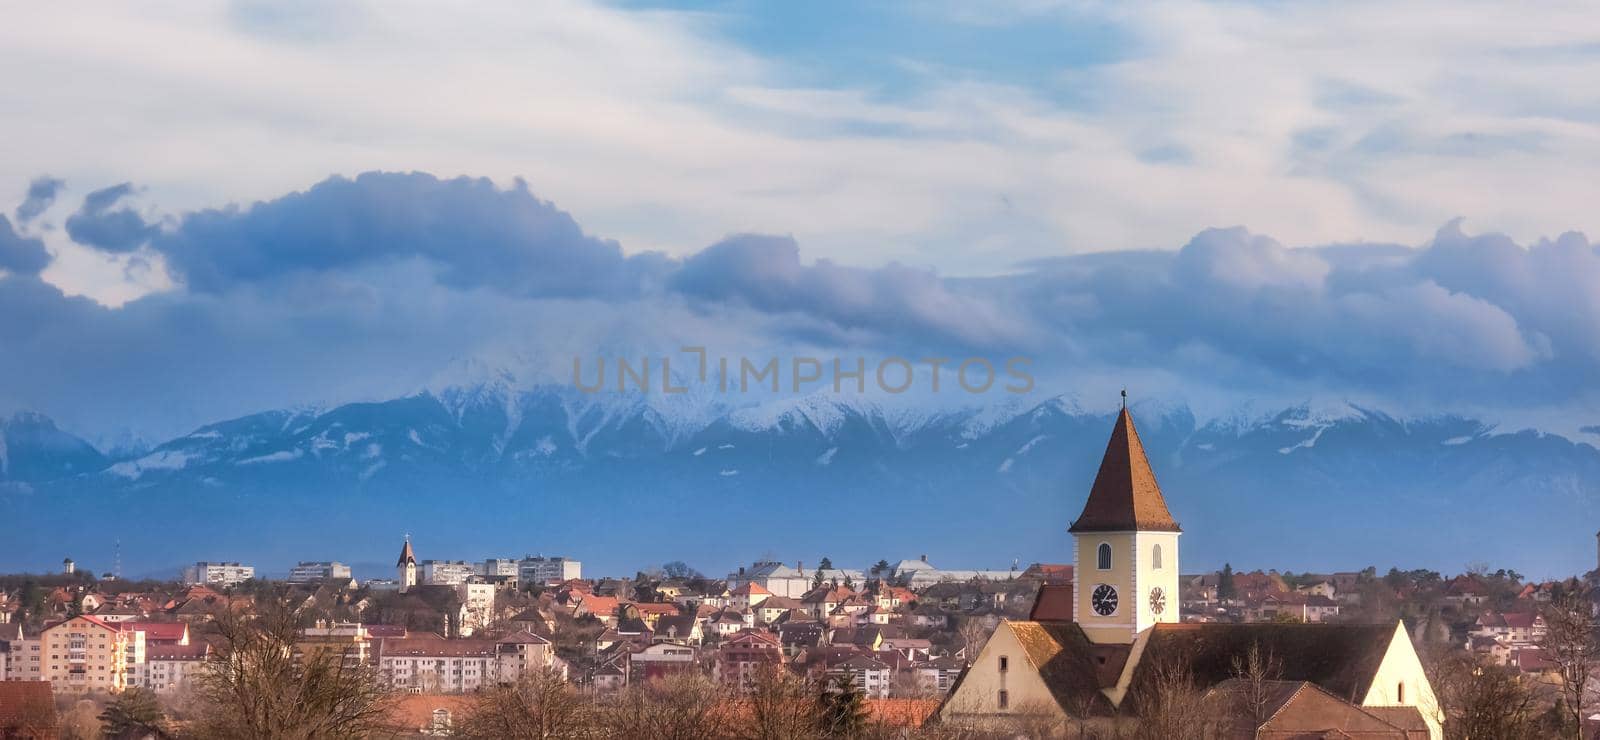 Sibiu city with the Fagaras Mountains in the back, Romania by Roberto